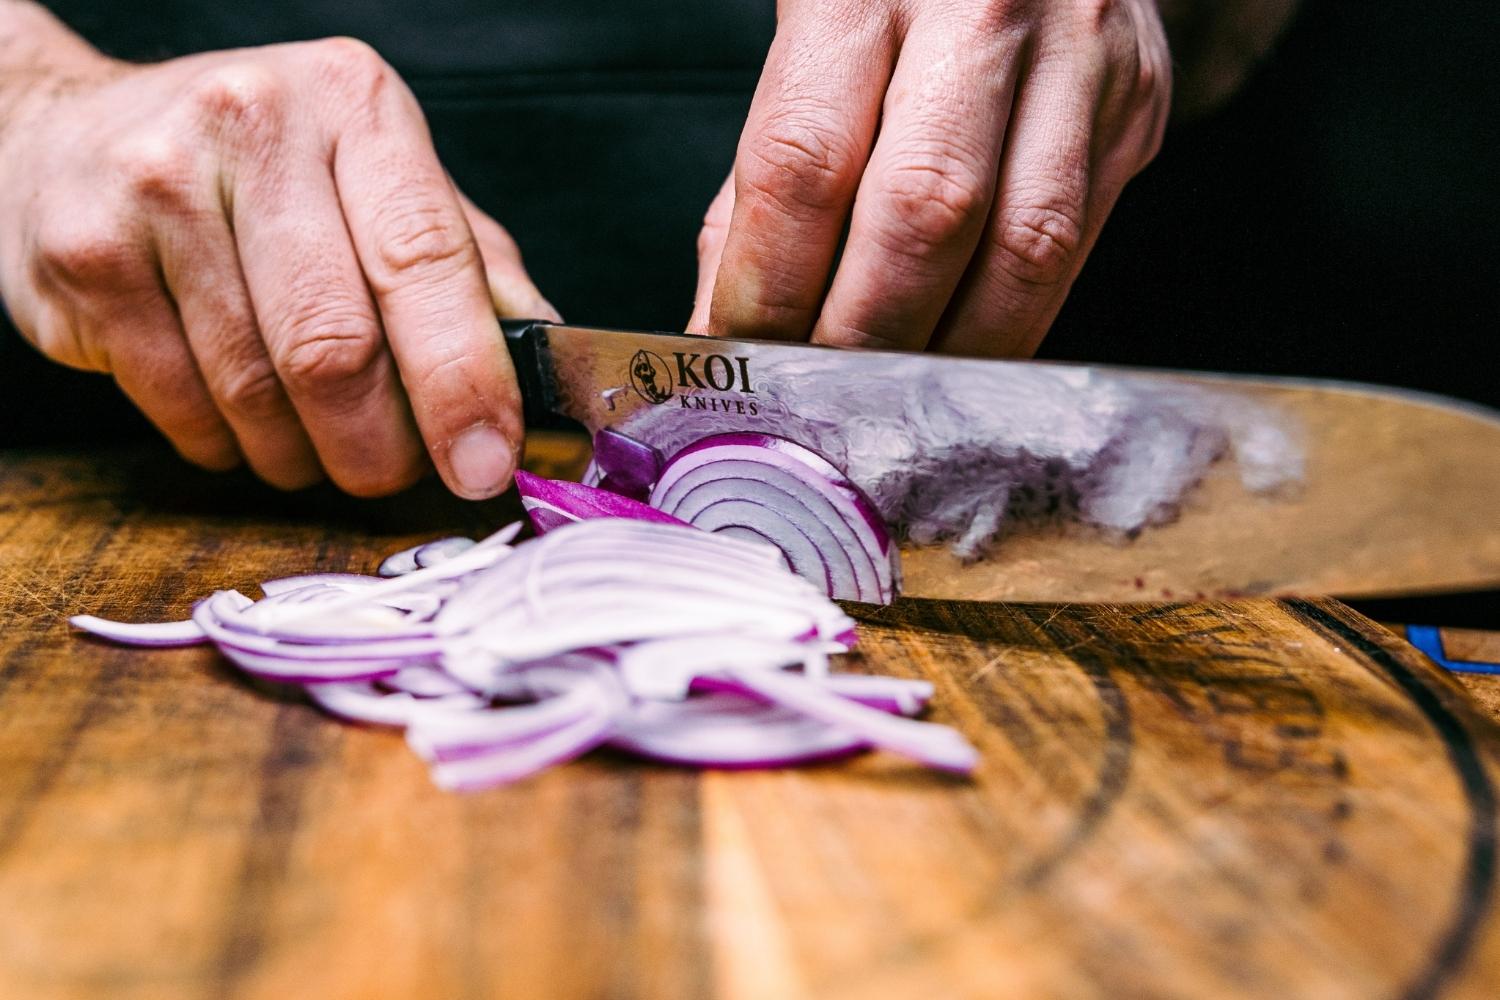 The 6 unique knives you need in your kitchen